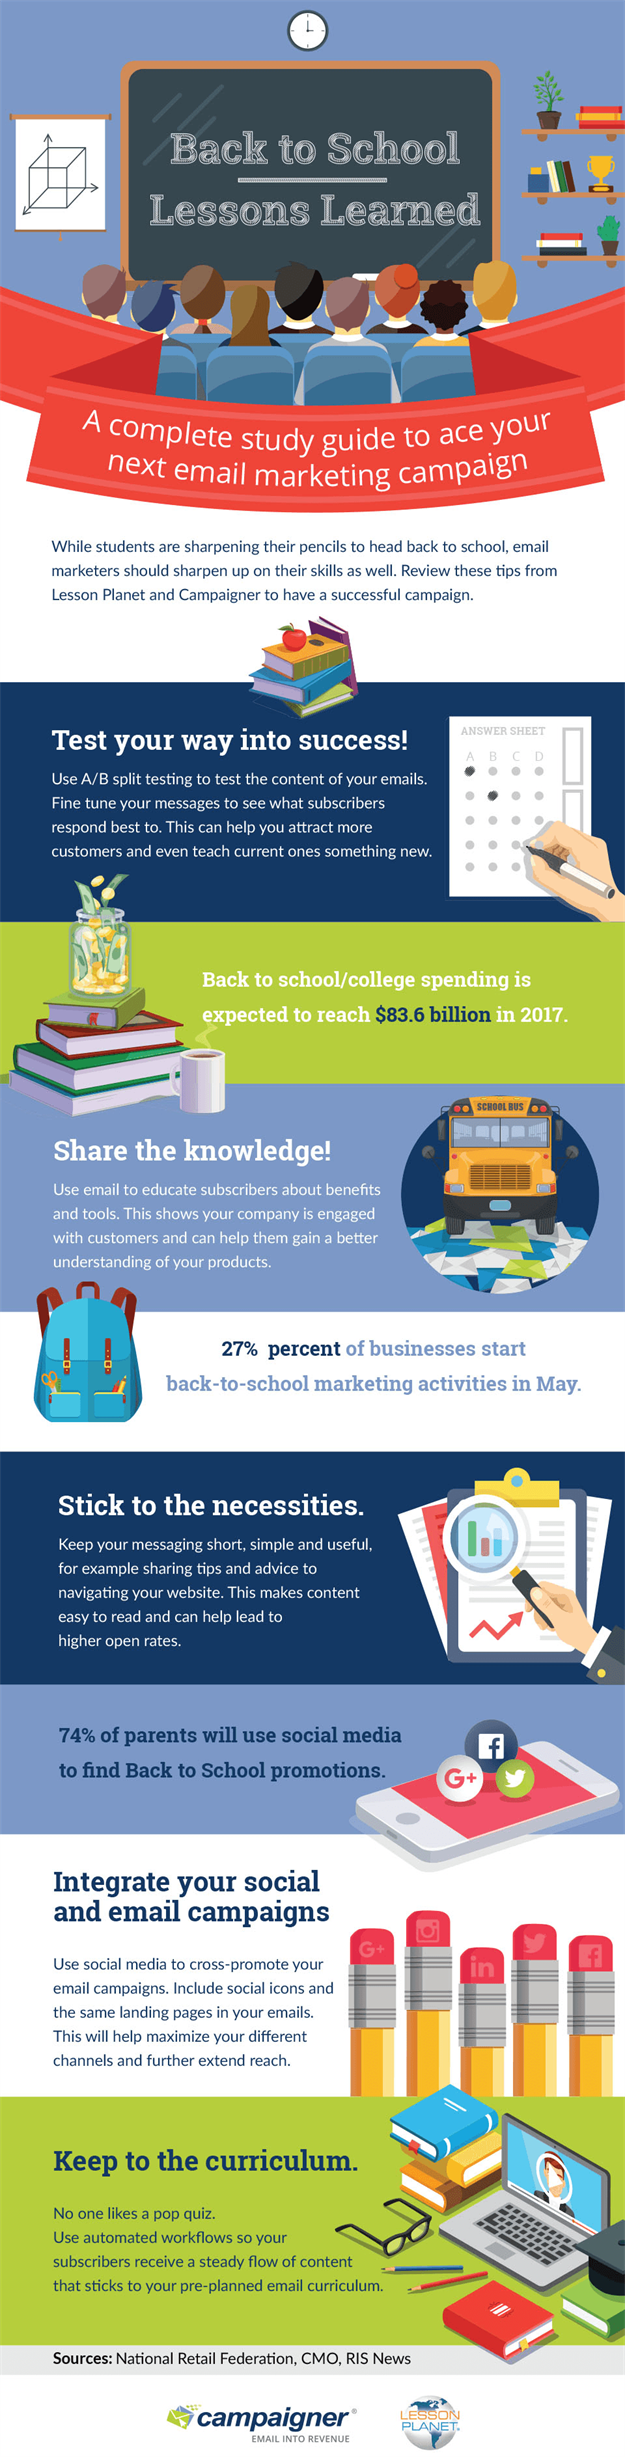 7 Back to School Real Estate Marketing Ideas – Infographic